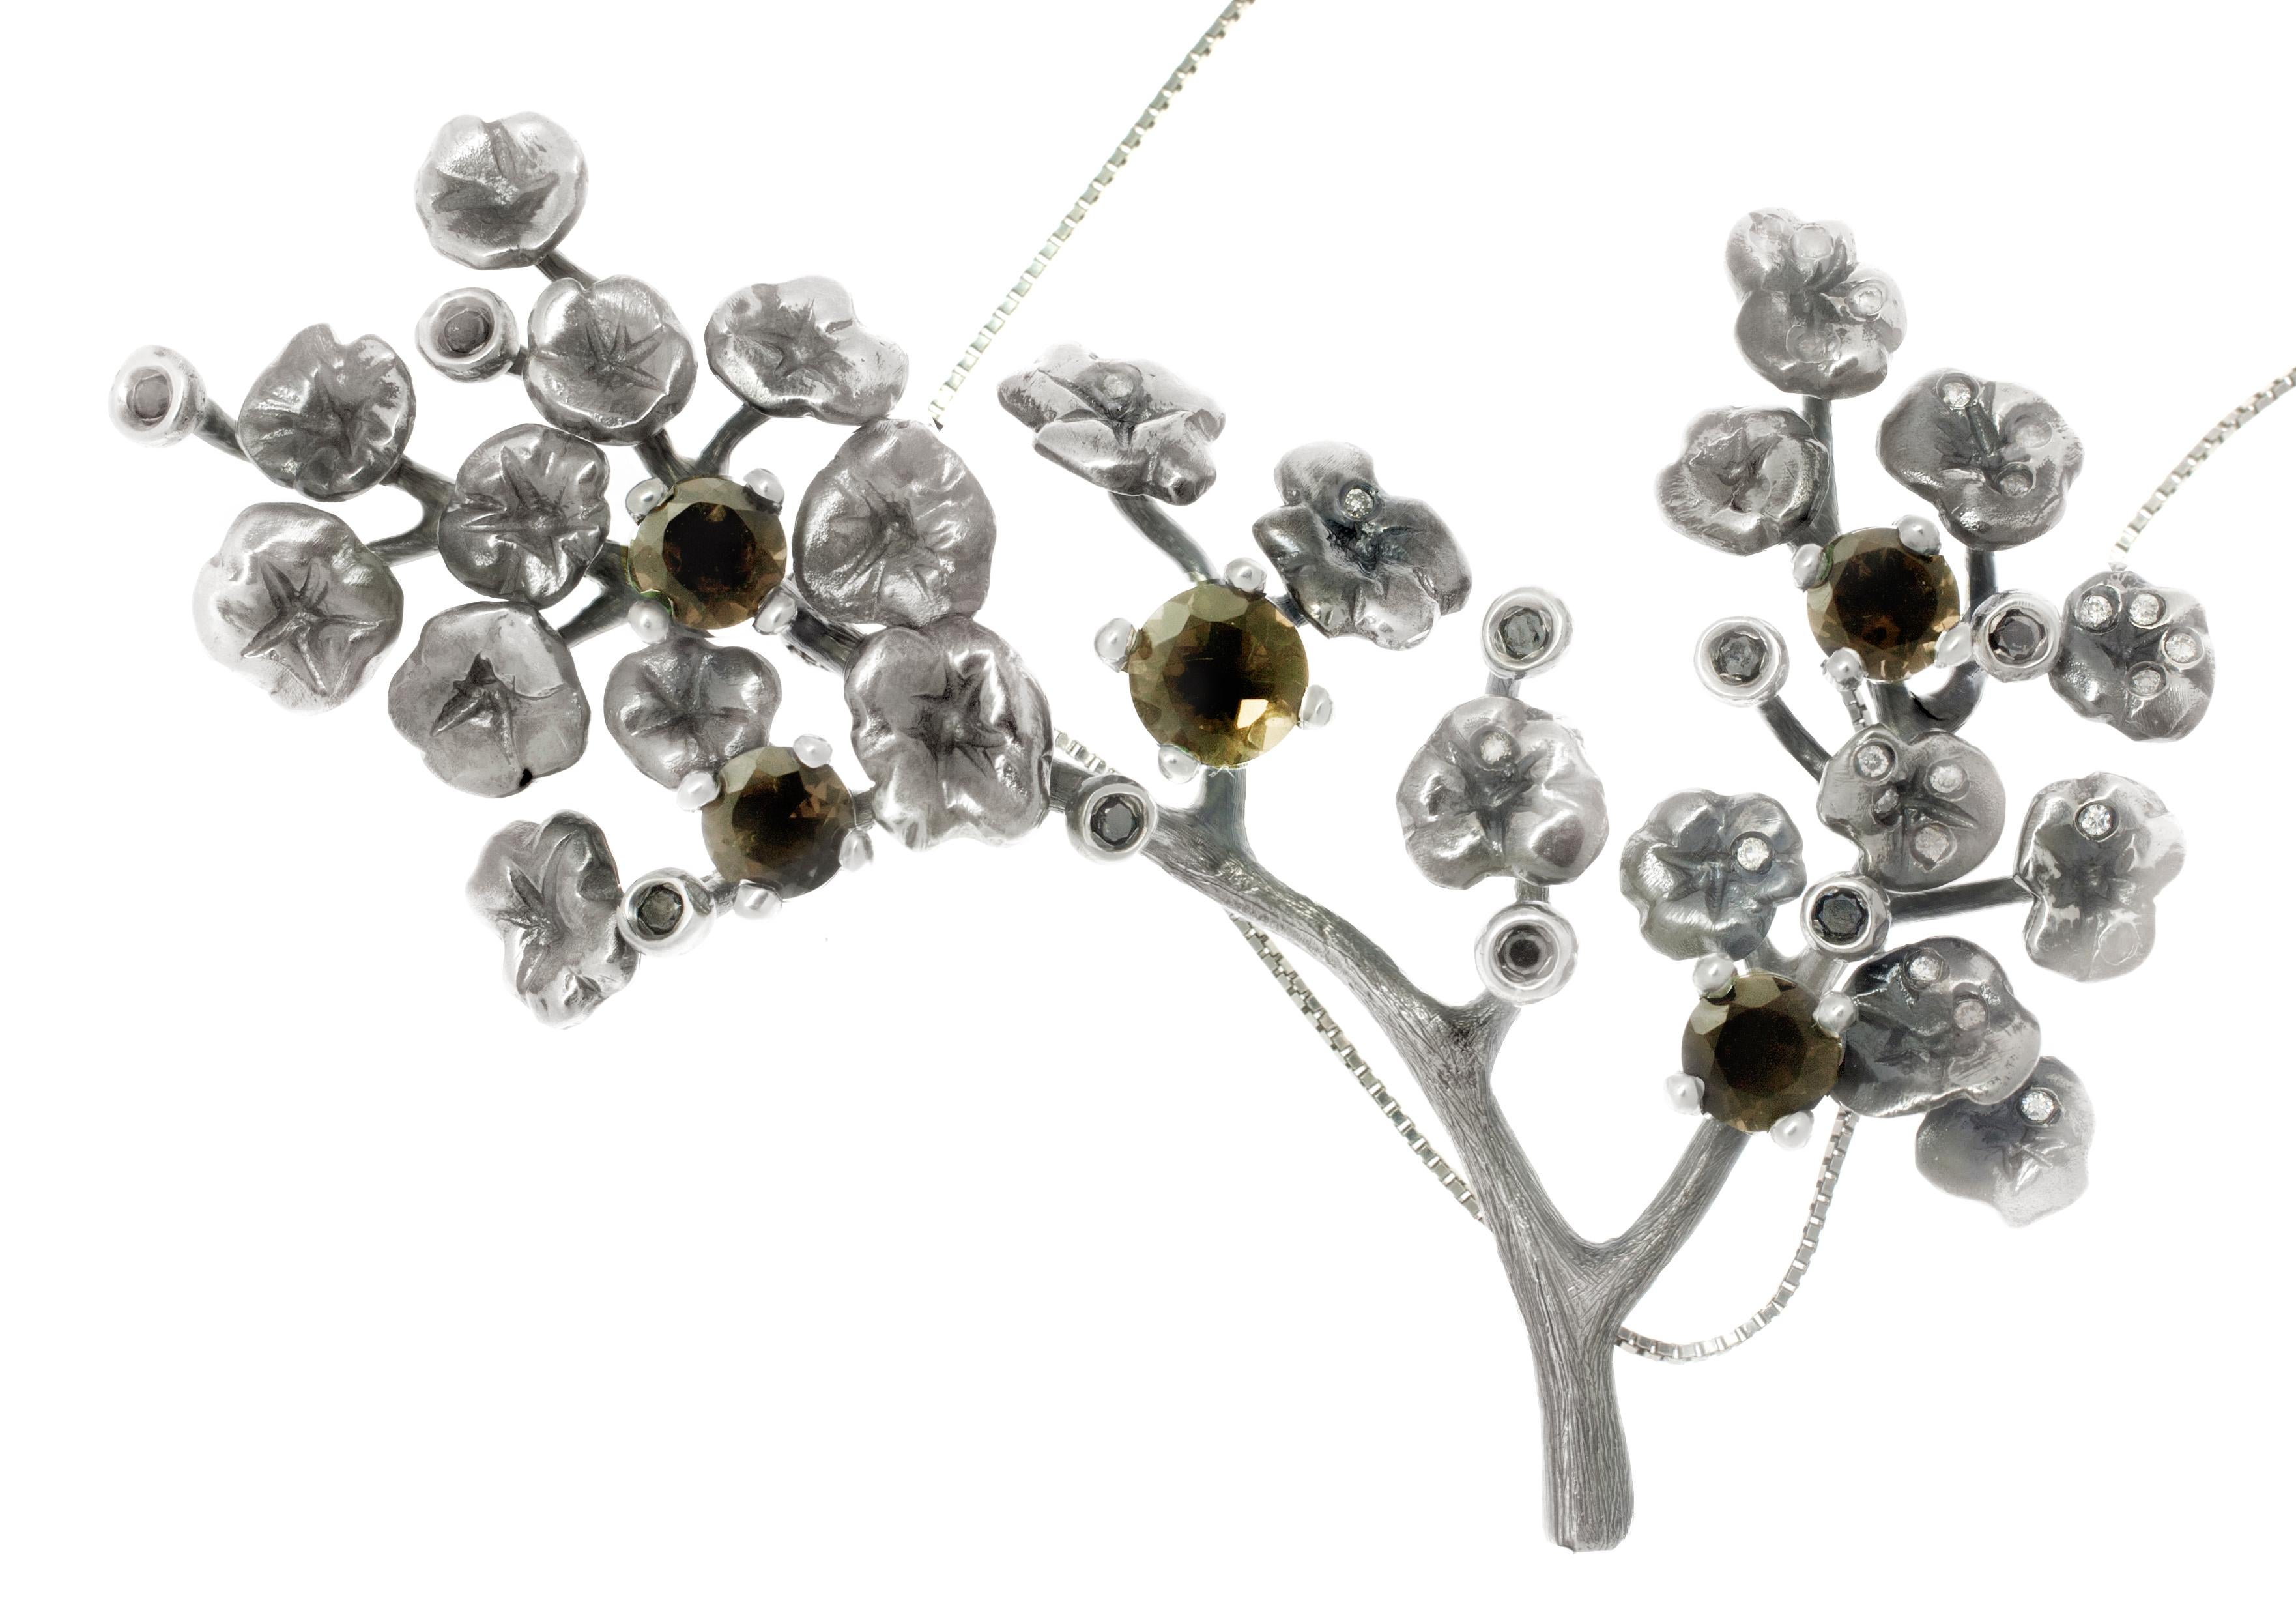 This beautiful Heliotrope contemporary necklace by the artist features 34 white and black diamonds and 5 smoky quartz stones. Made from dark silver, this piece exudes a designer, new gothic look that is unique and eye-catching. The diamonds and